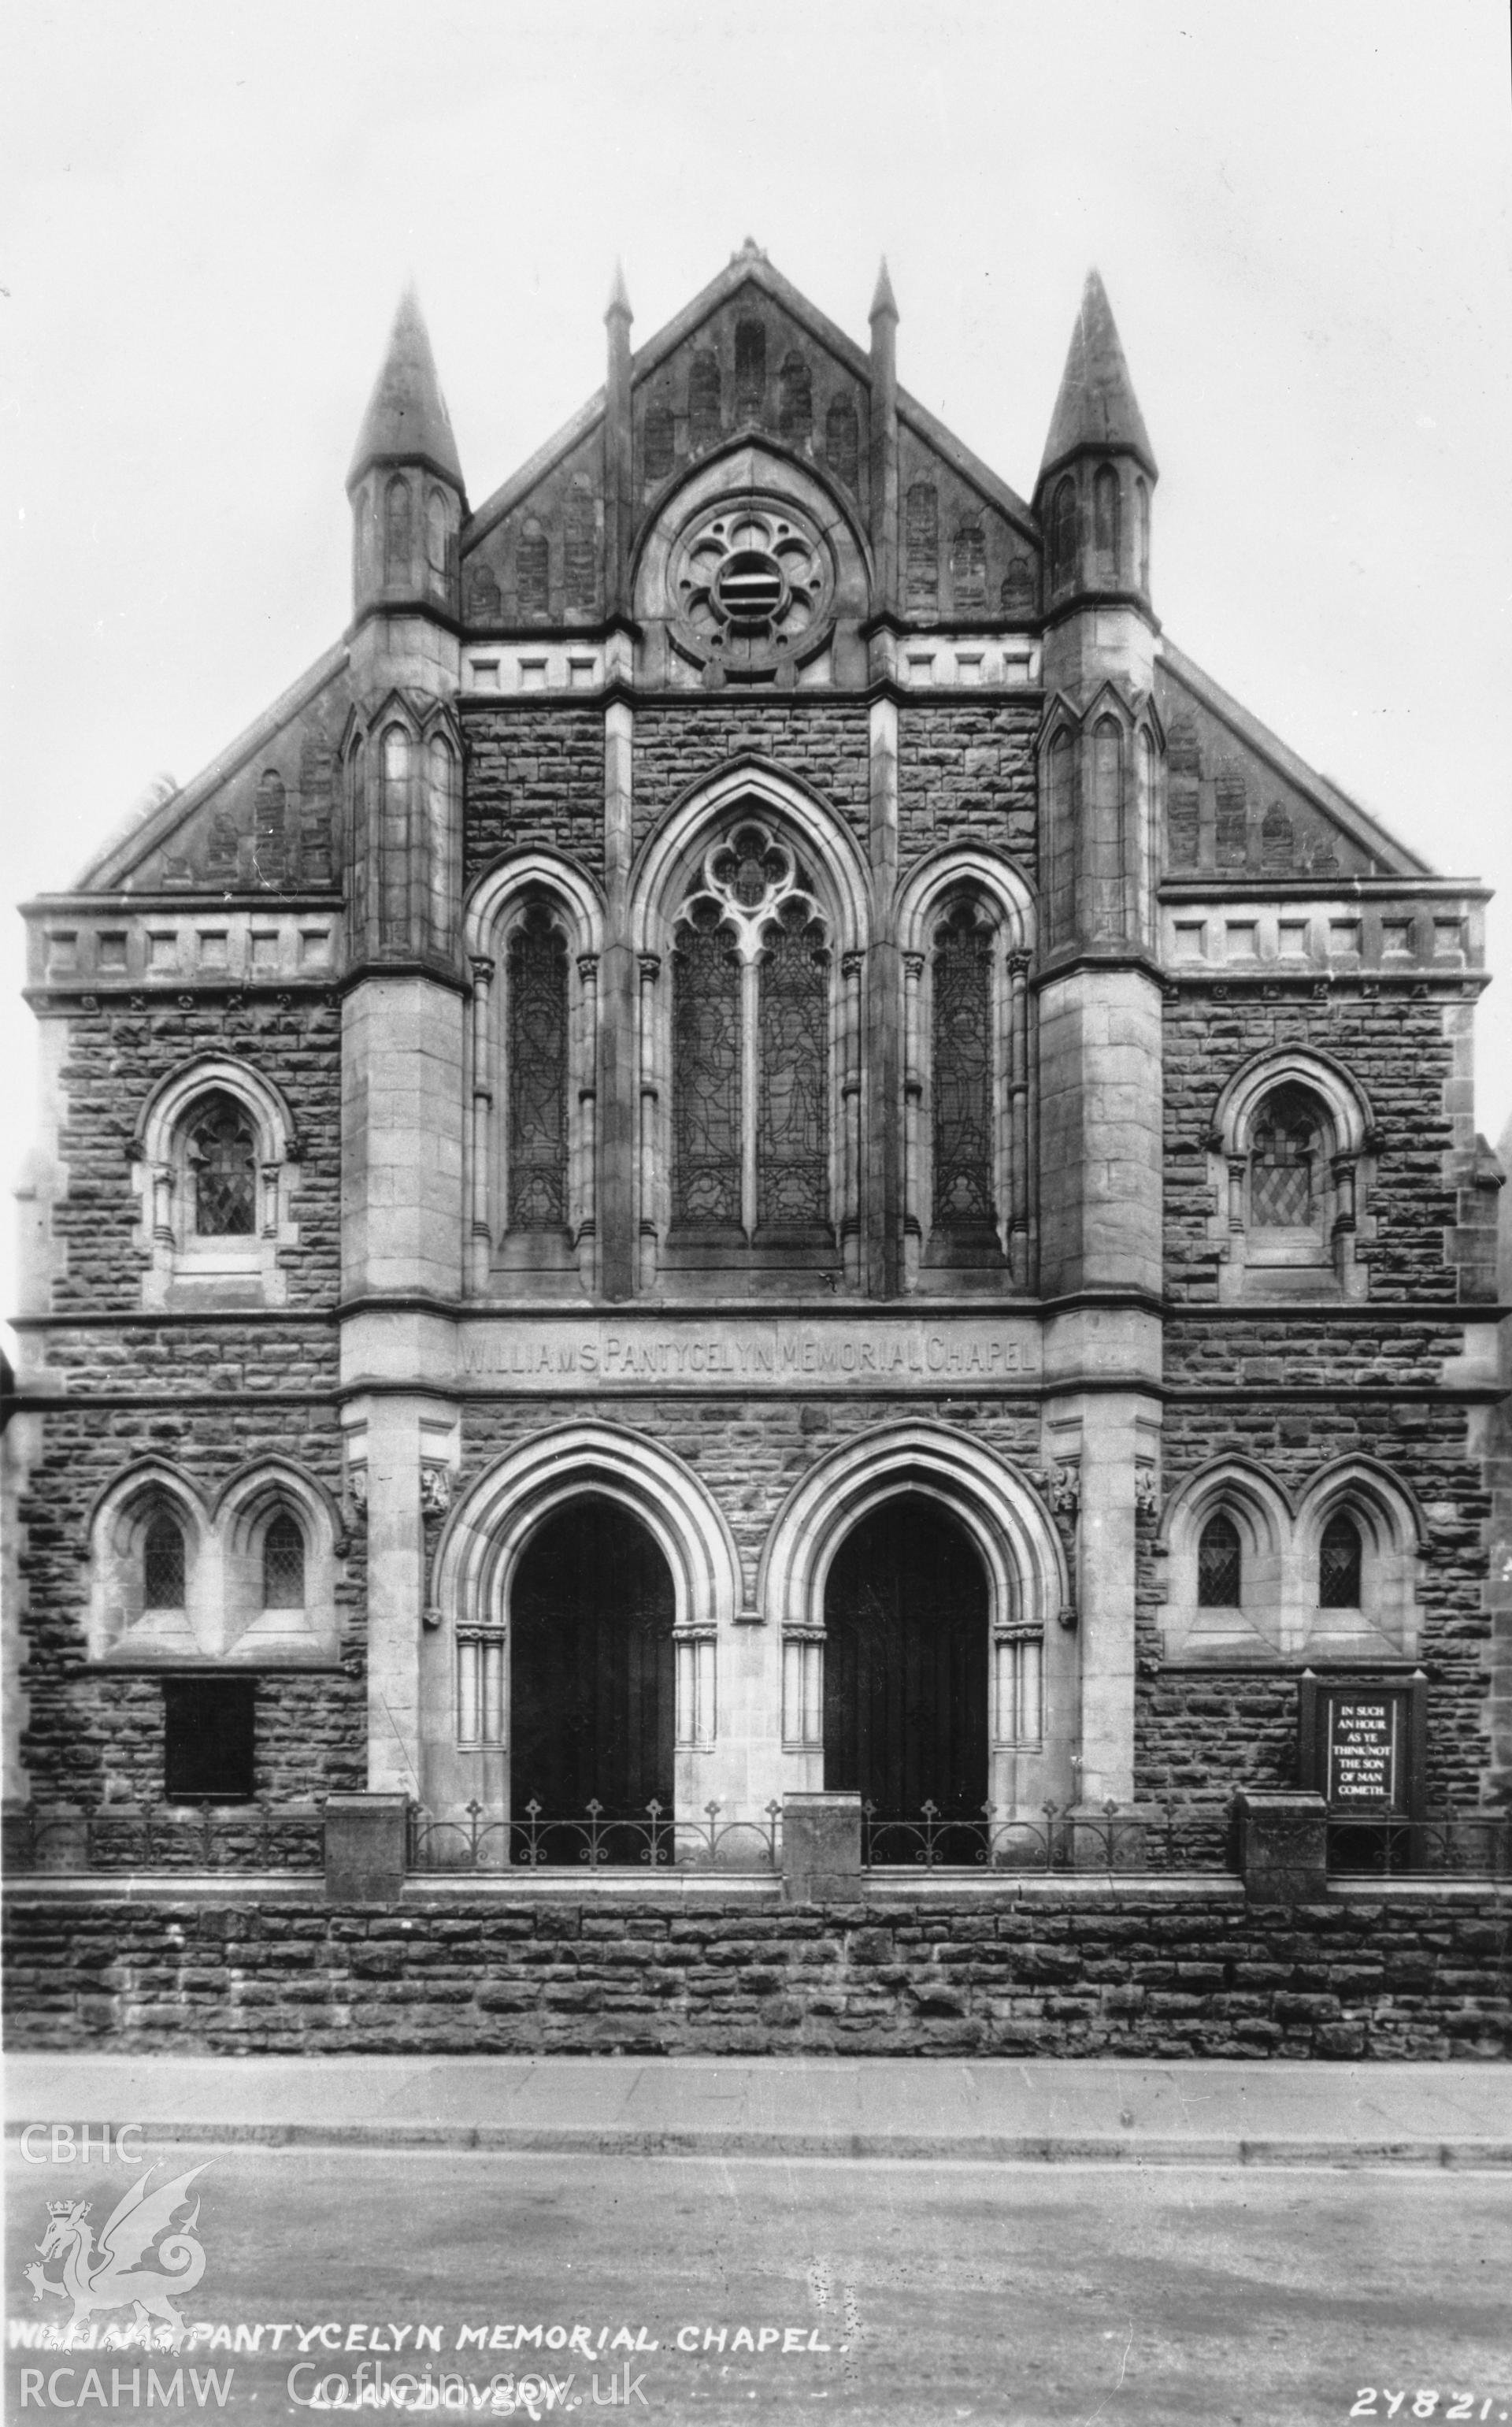 Williams Pantycelyn Memorial Chapel, Llandovery; B&W print copied from an undated postcard, loaned for copying by Thomas Lloyd.  Copy negative held.